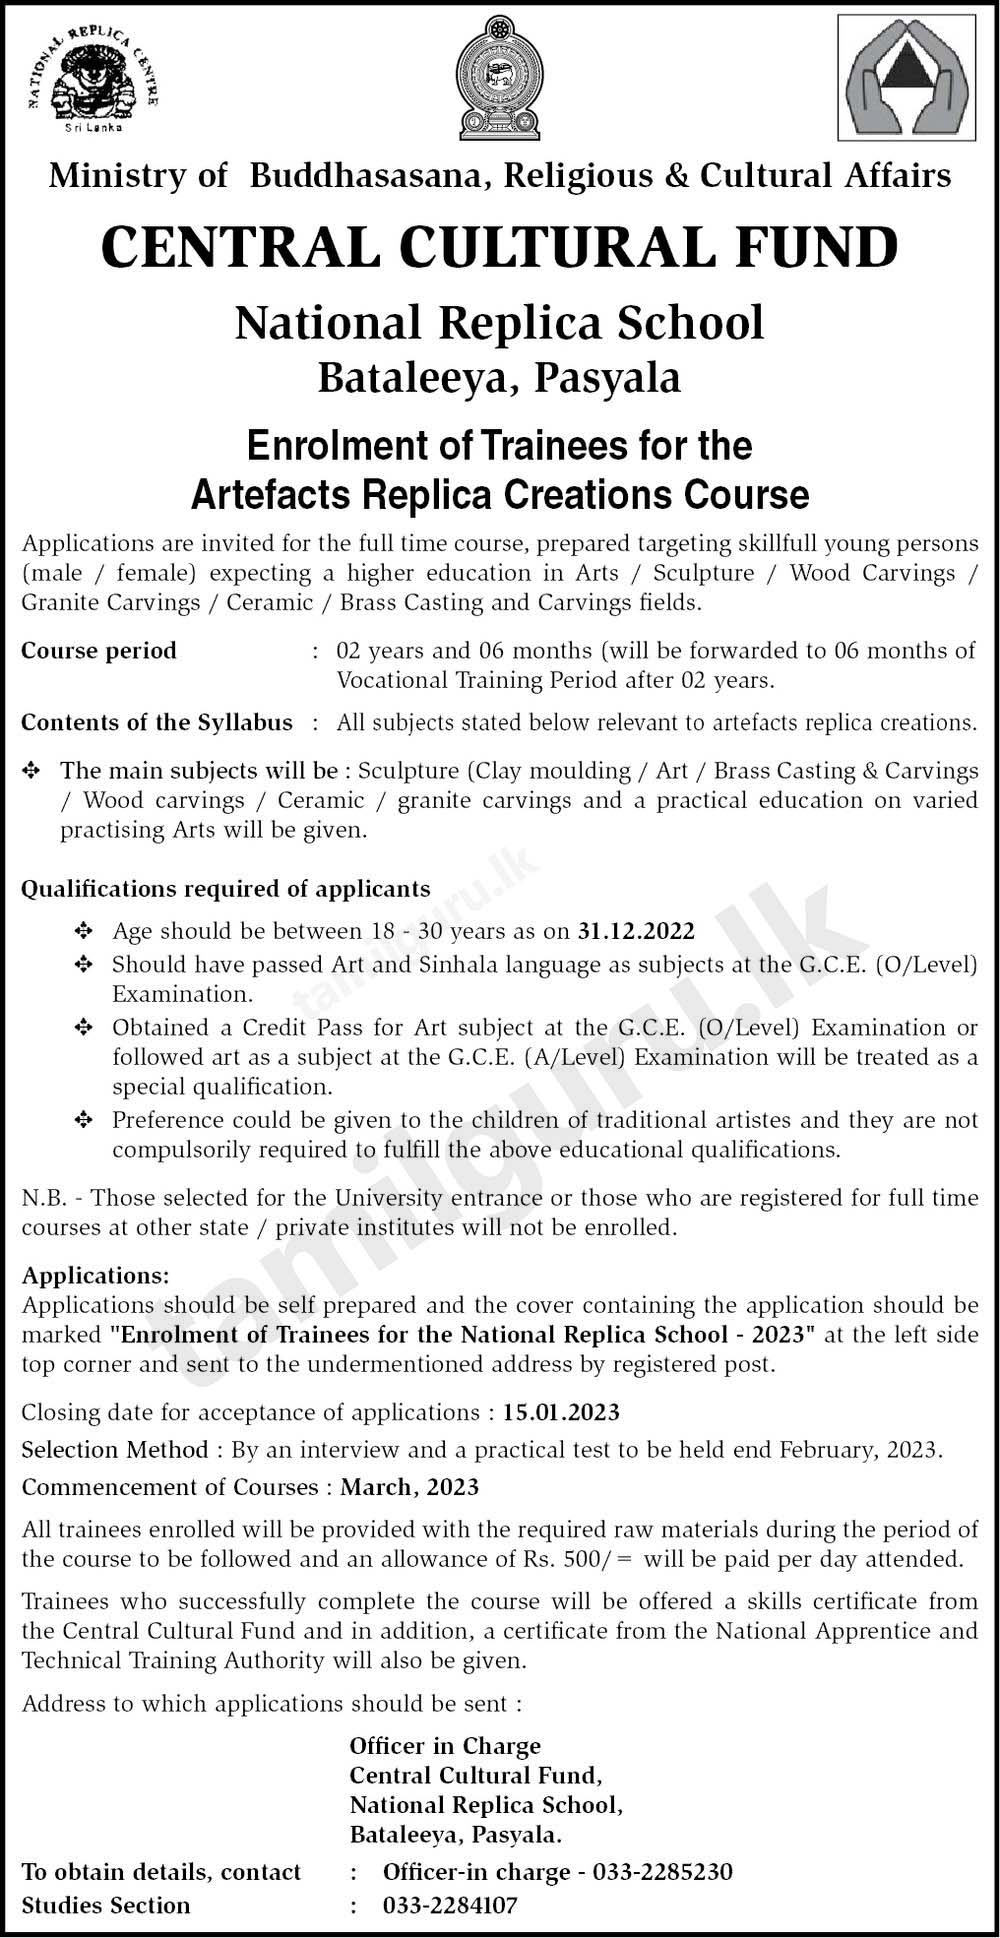 Calling Applications for Artefacts Replica Creations Course (2022) - National Replica School, Central Cultural Fund (CCF)